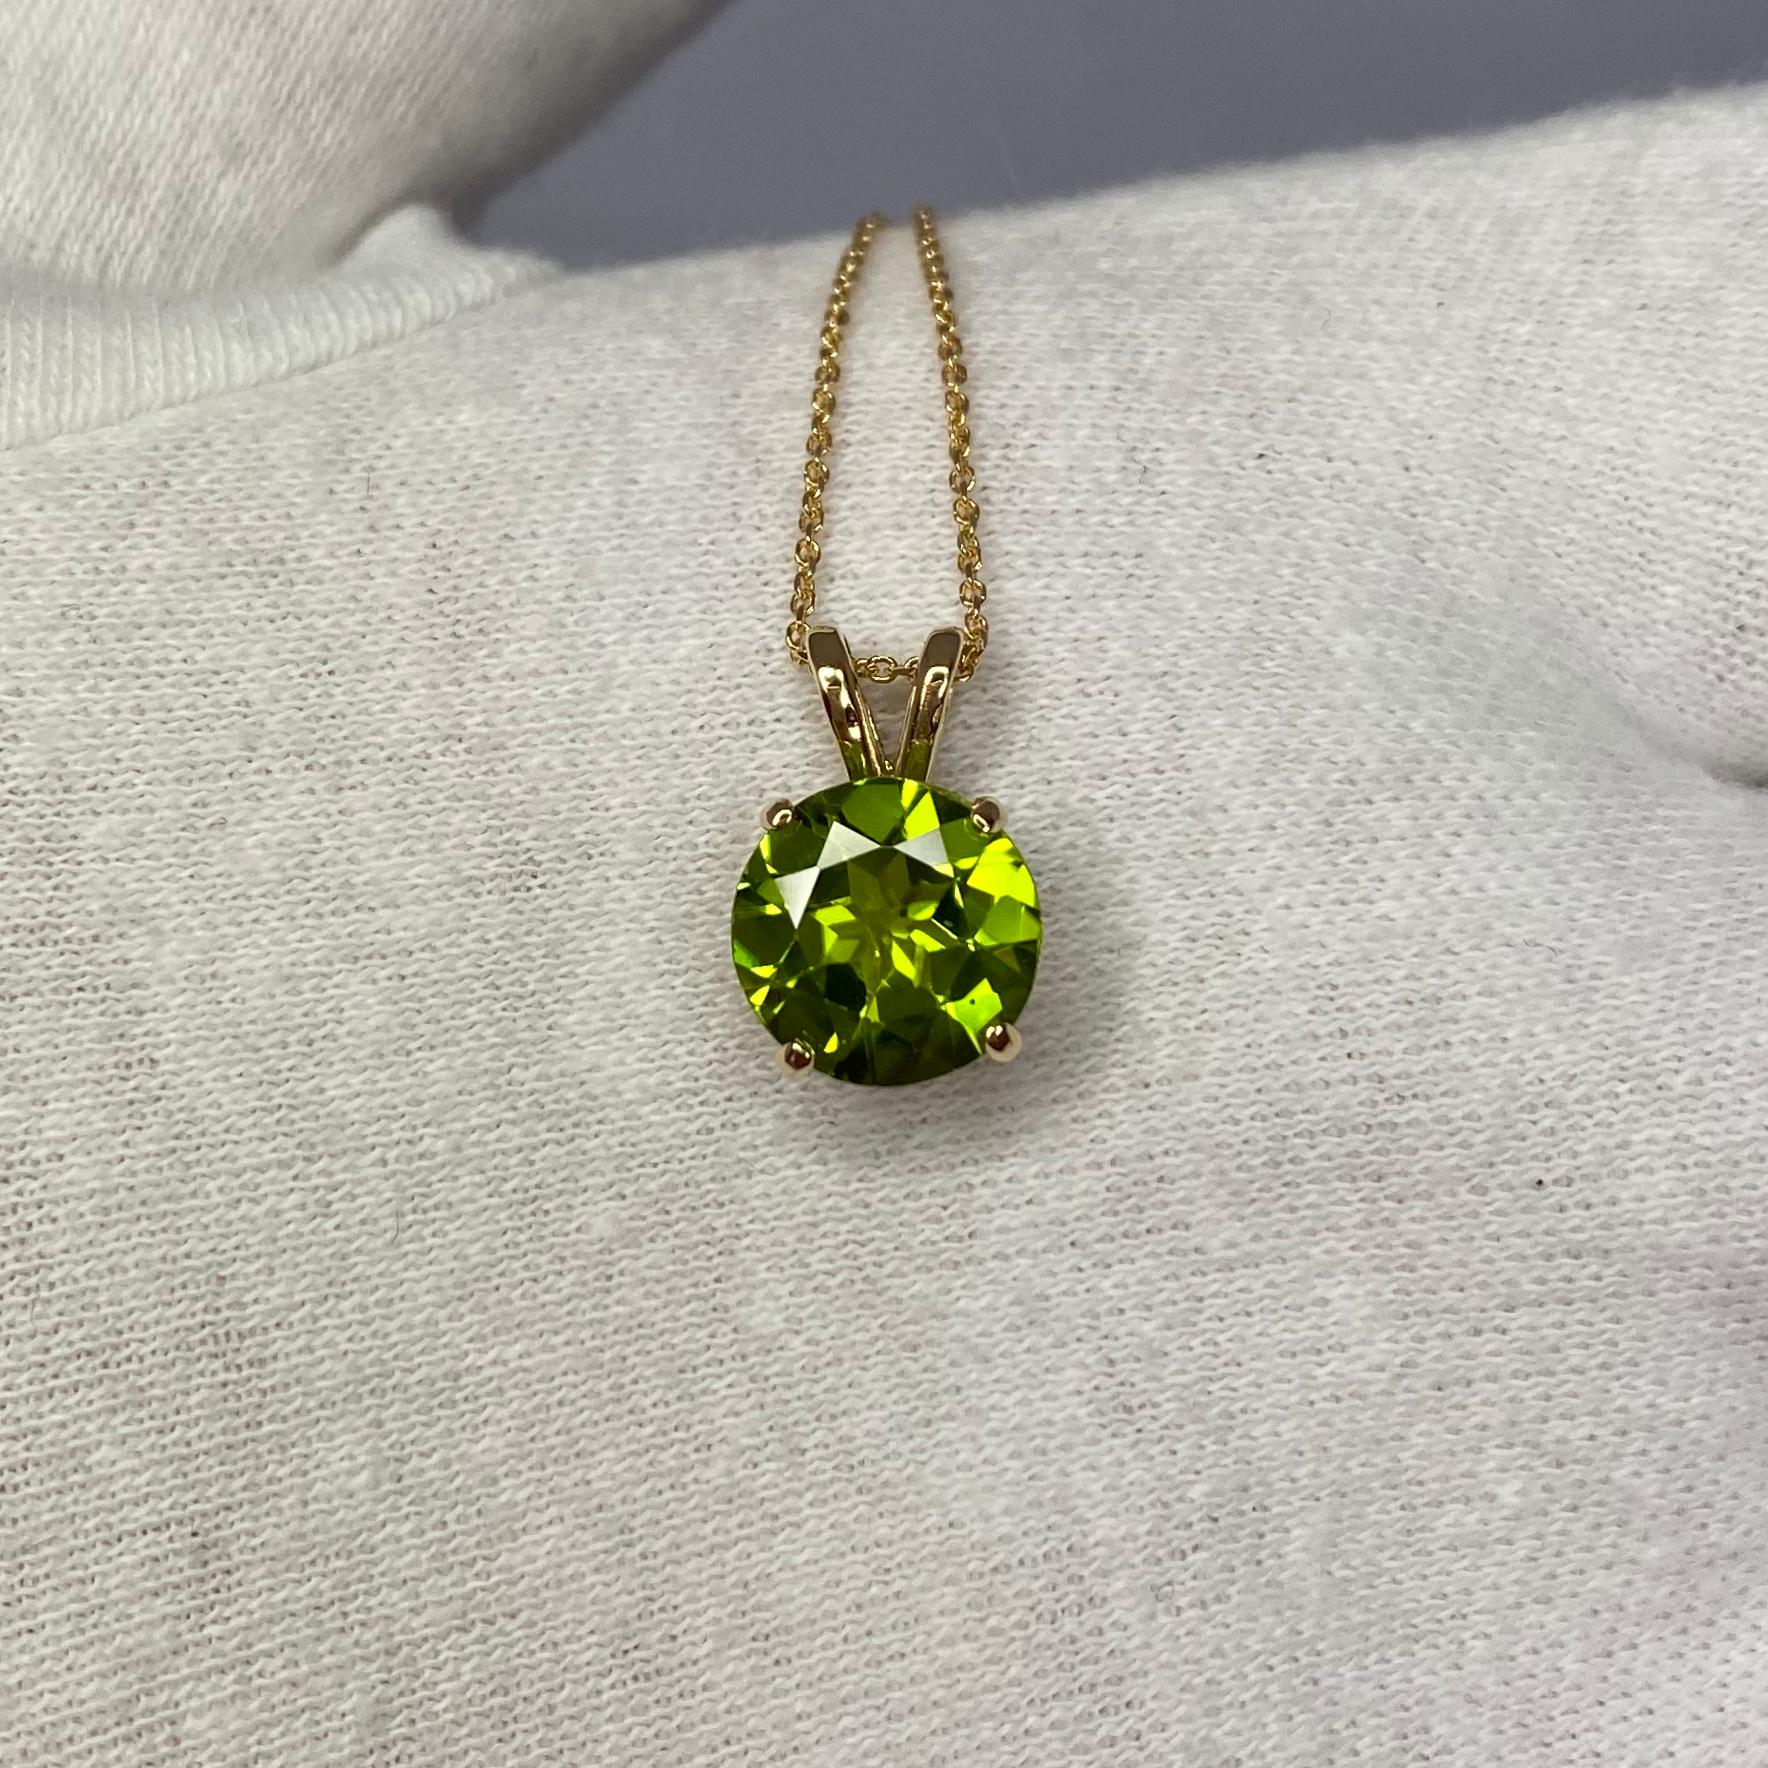 Beautiful natural 2.55 carat deep vividd peridot set in a fine 14k yellow gold solitaire pendant.

Stunning peridot with a bright and vivid green colour and good clarity, clean stone with only some small natural inclusions visible when looking